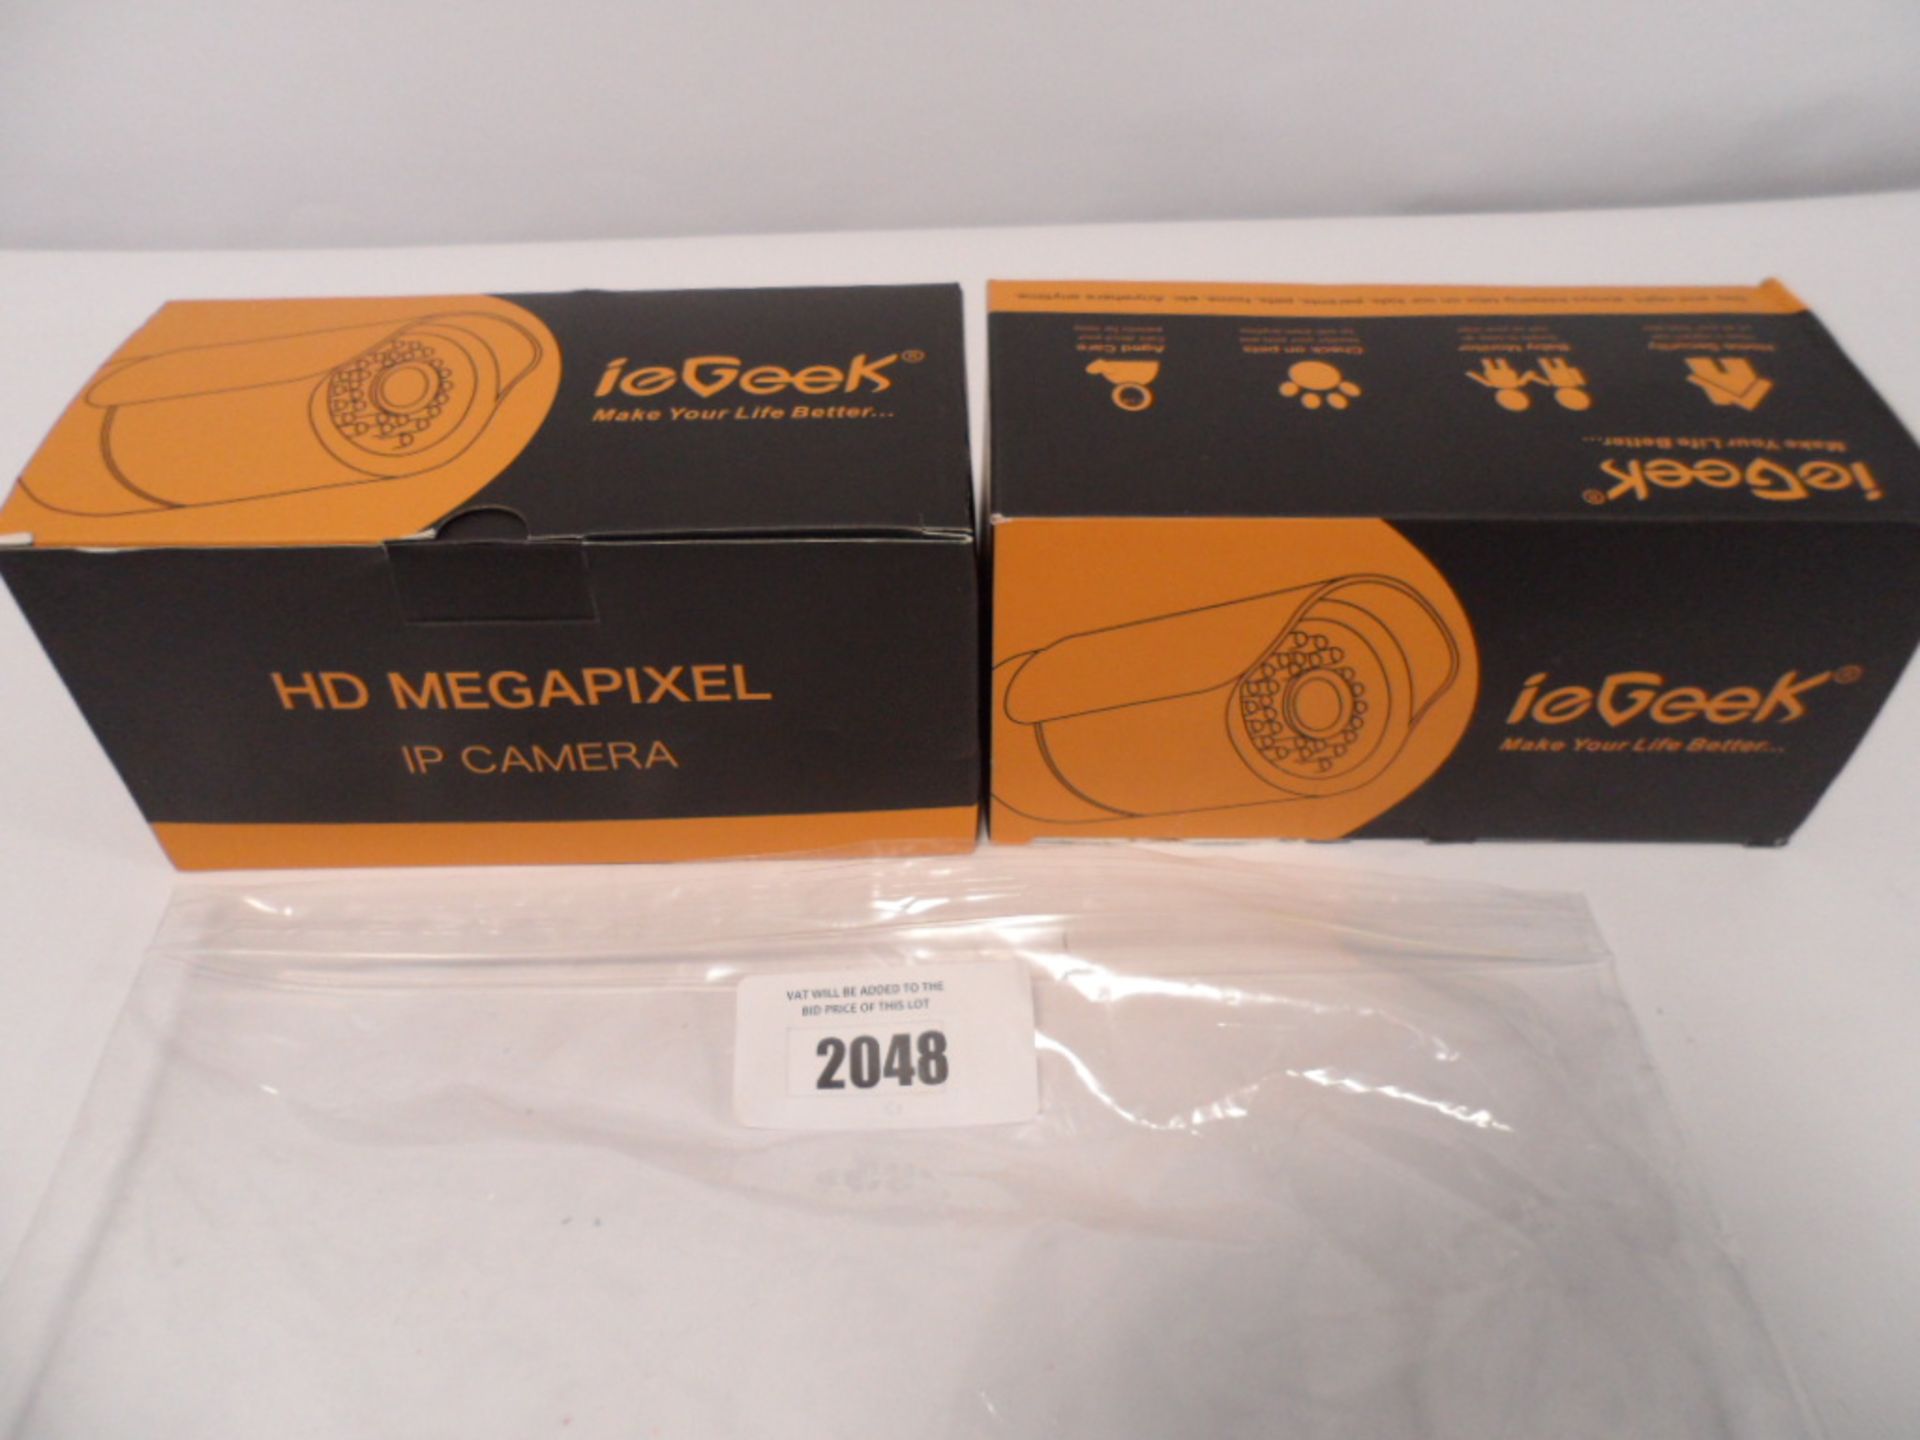 Two IeGeek wifi cctv camera boxed